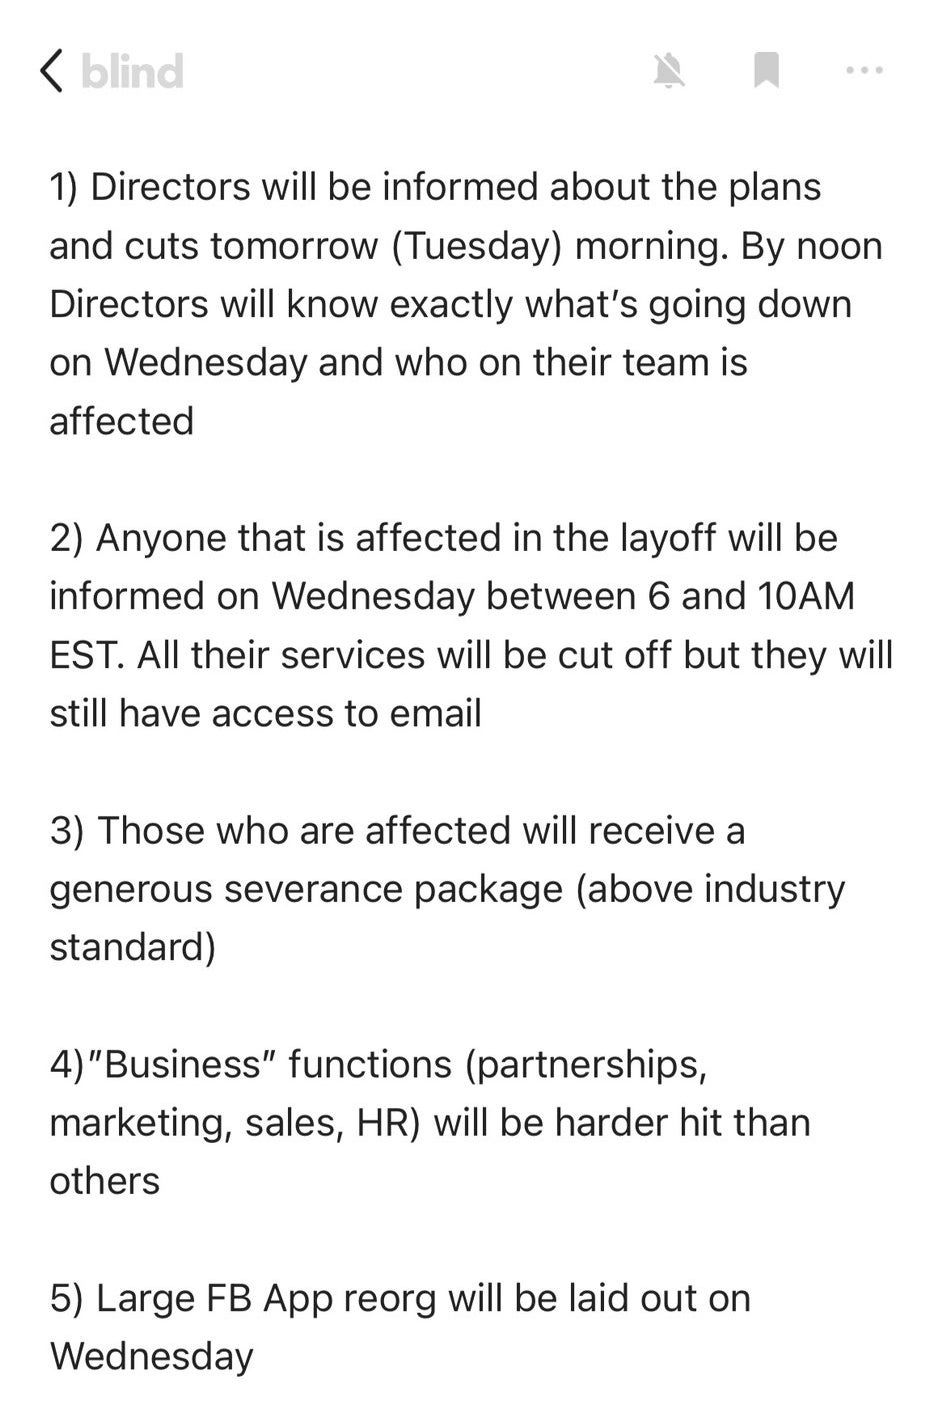 A screenshot from Blind with a numbered information list about the process for Meta's layoffs